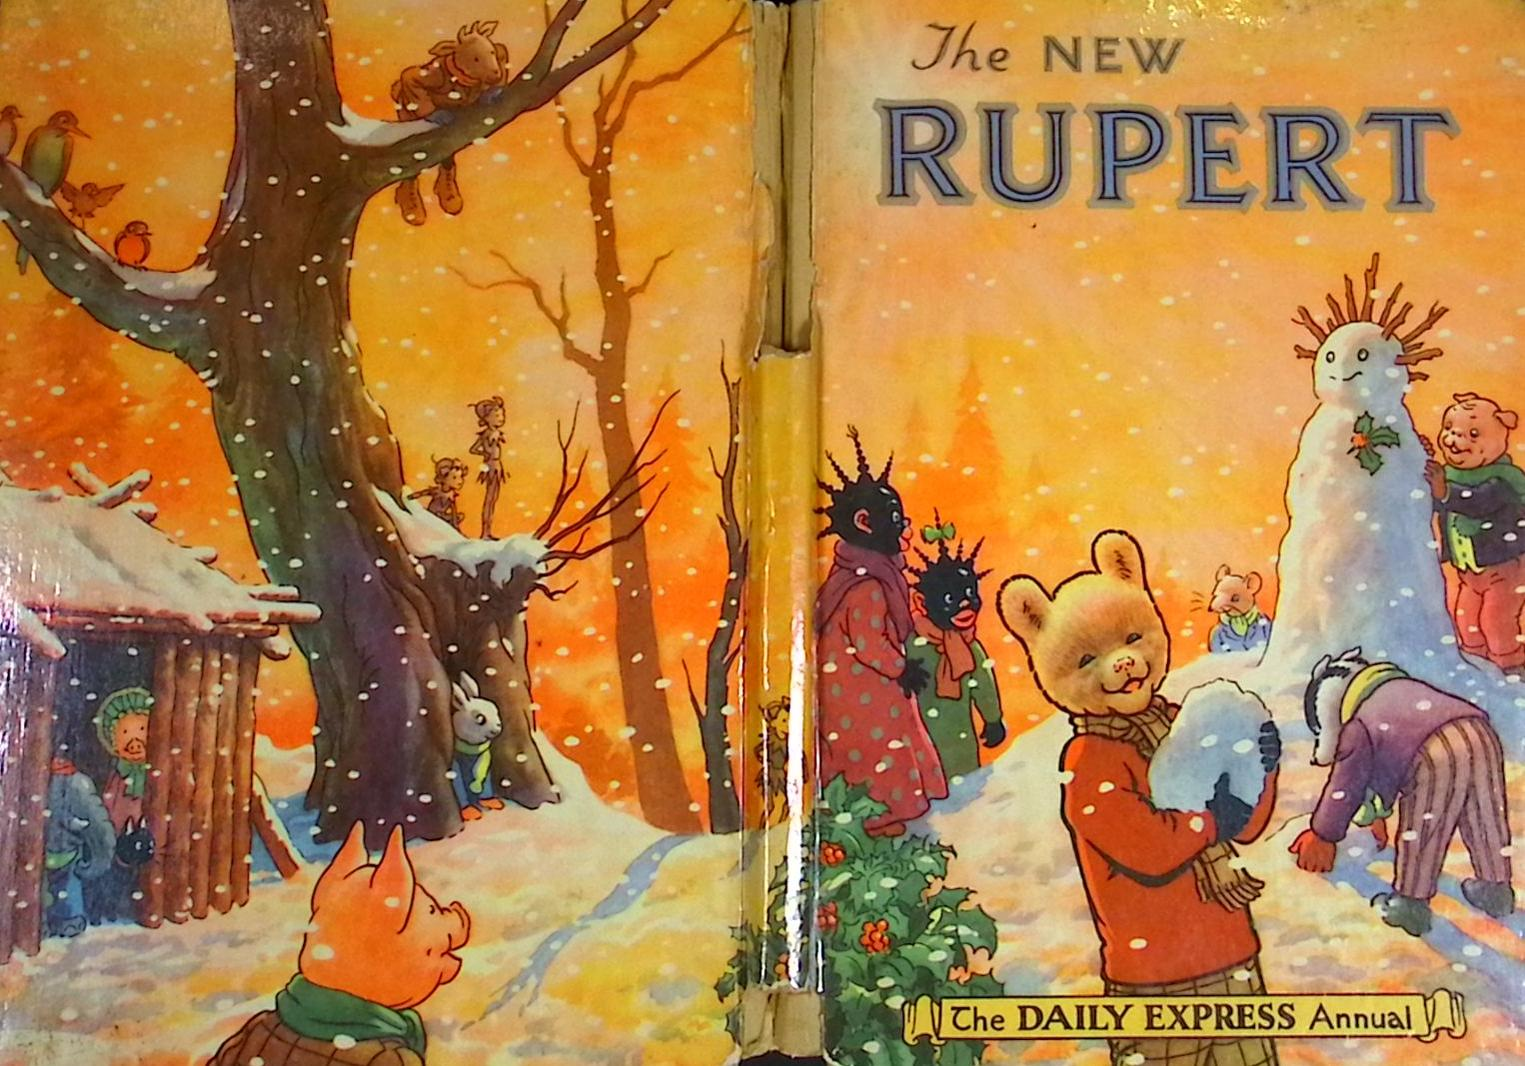 The New Rupert. The Daily Express Annual 1954.